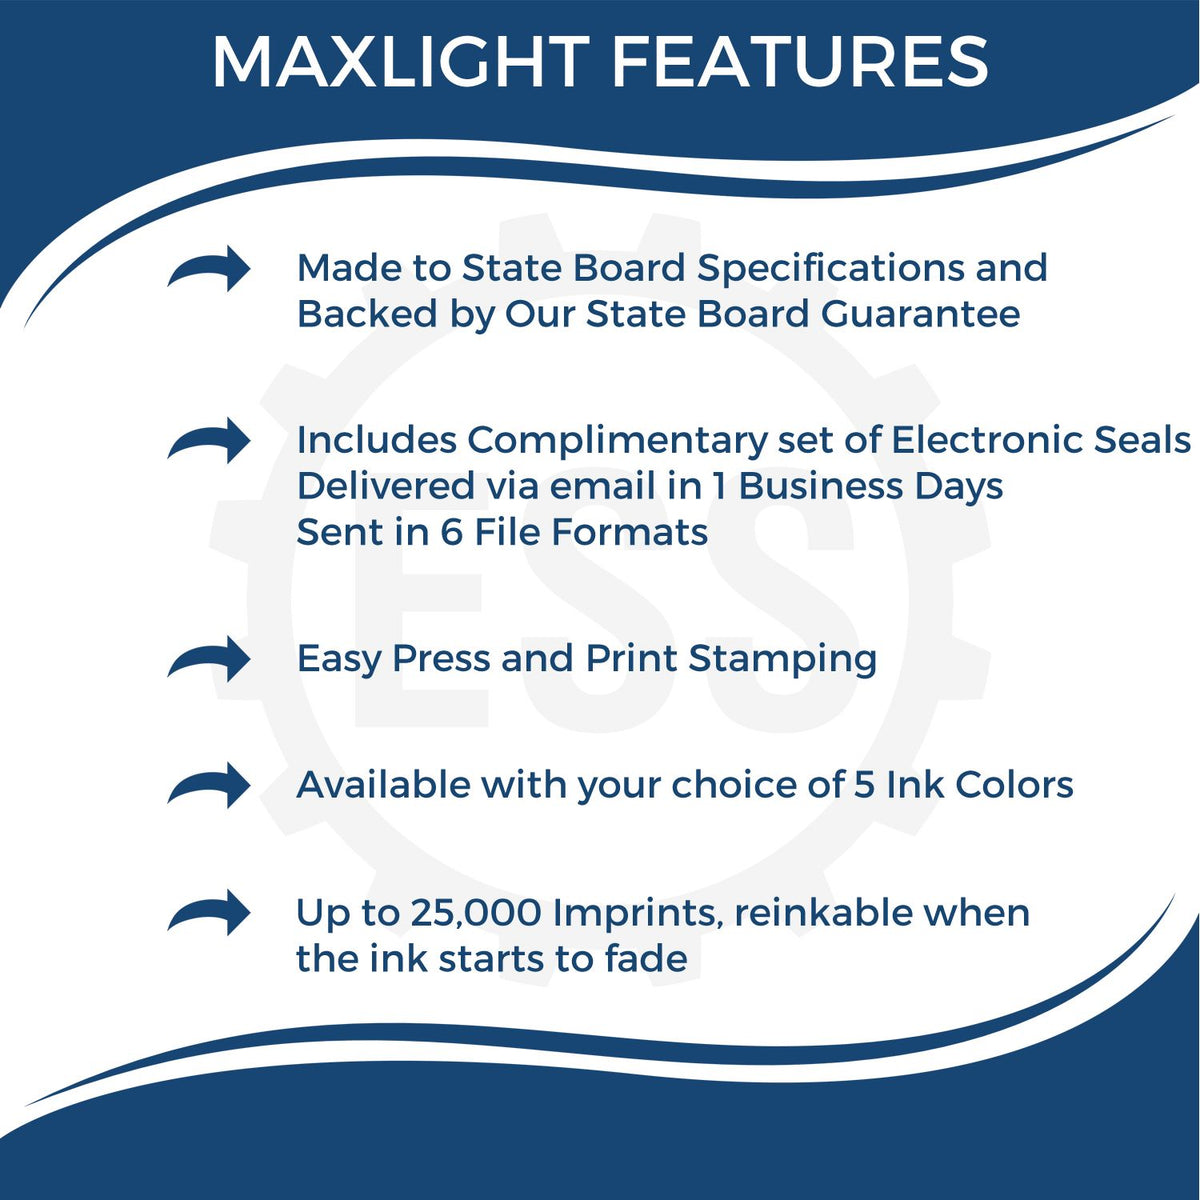 A picture of an infographic highlighting the selling points for the MaxLight Premium Pre-Inked Maine State Seal Notarial Stamp